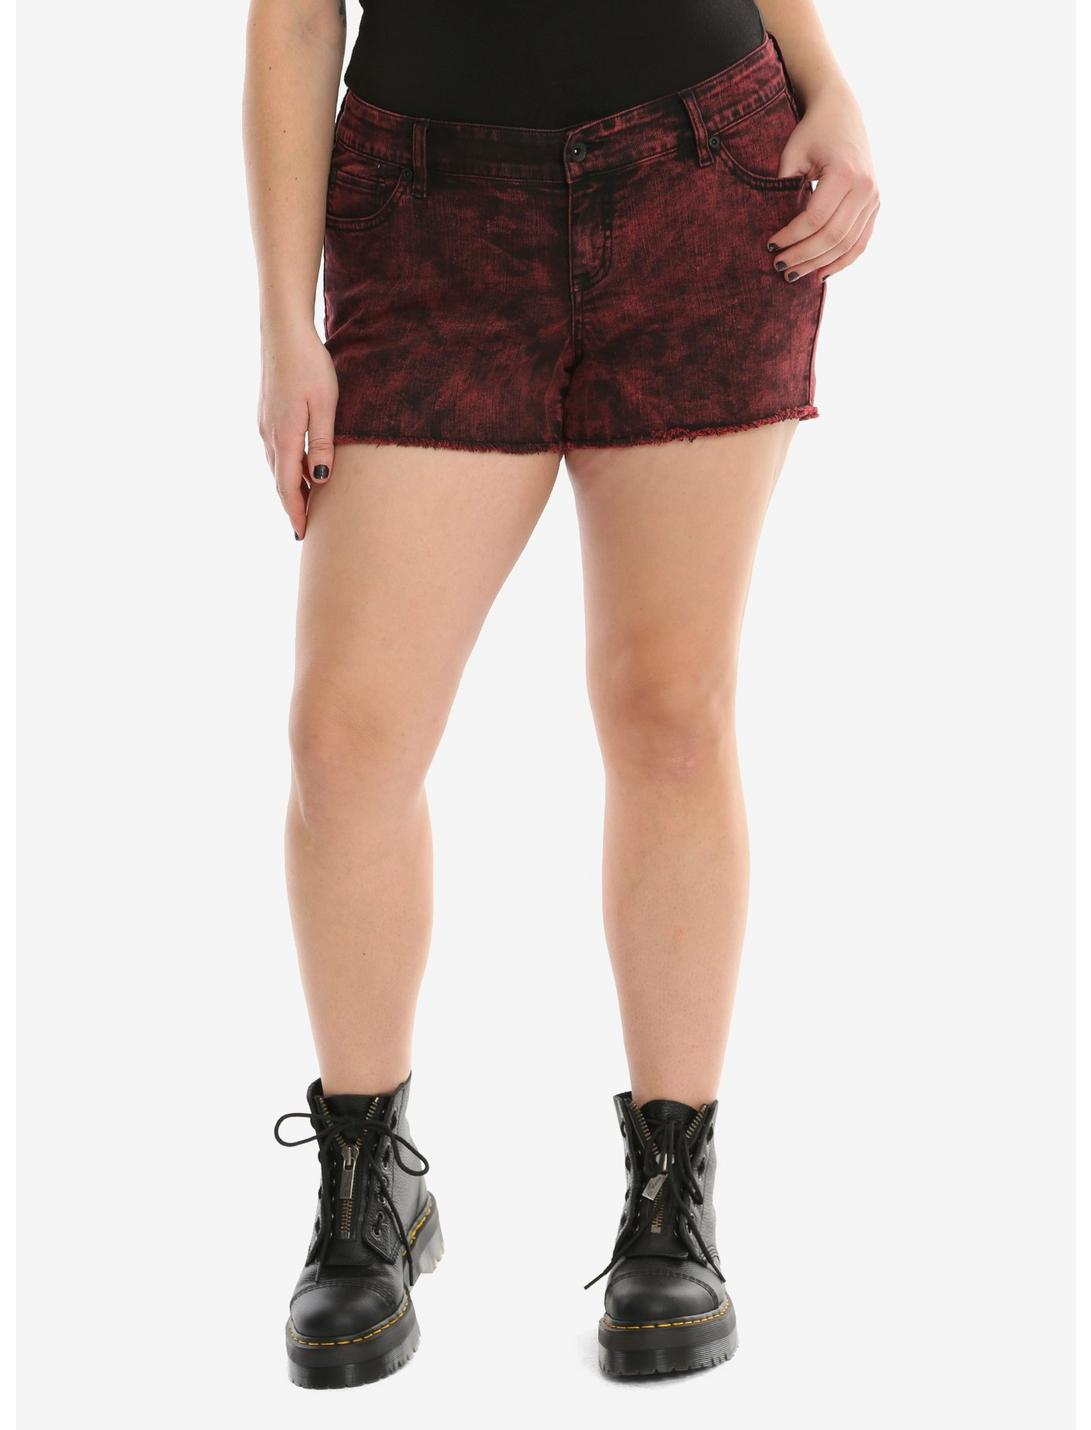 Blackheart Red Wash Low Rise Shorts Plus Size, RED, hi-res